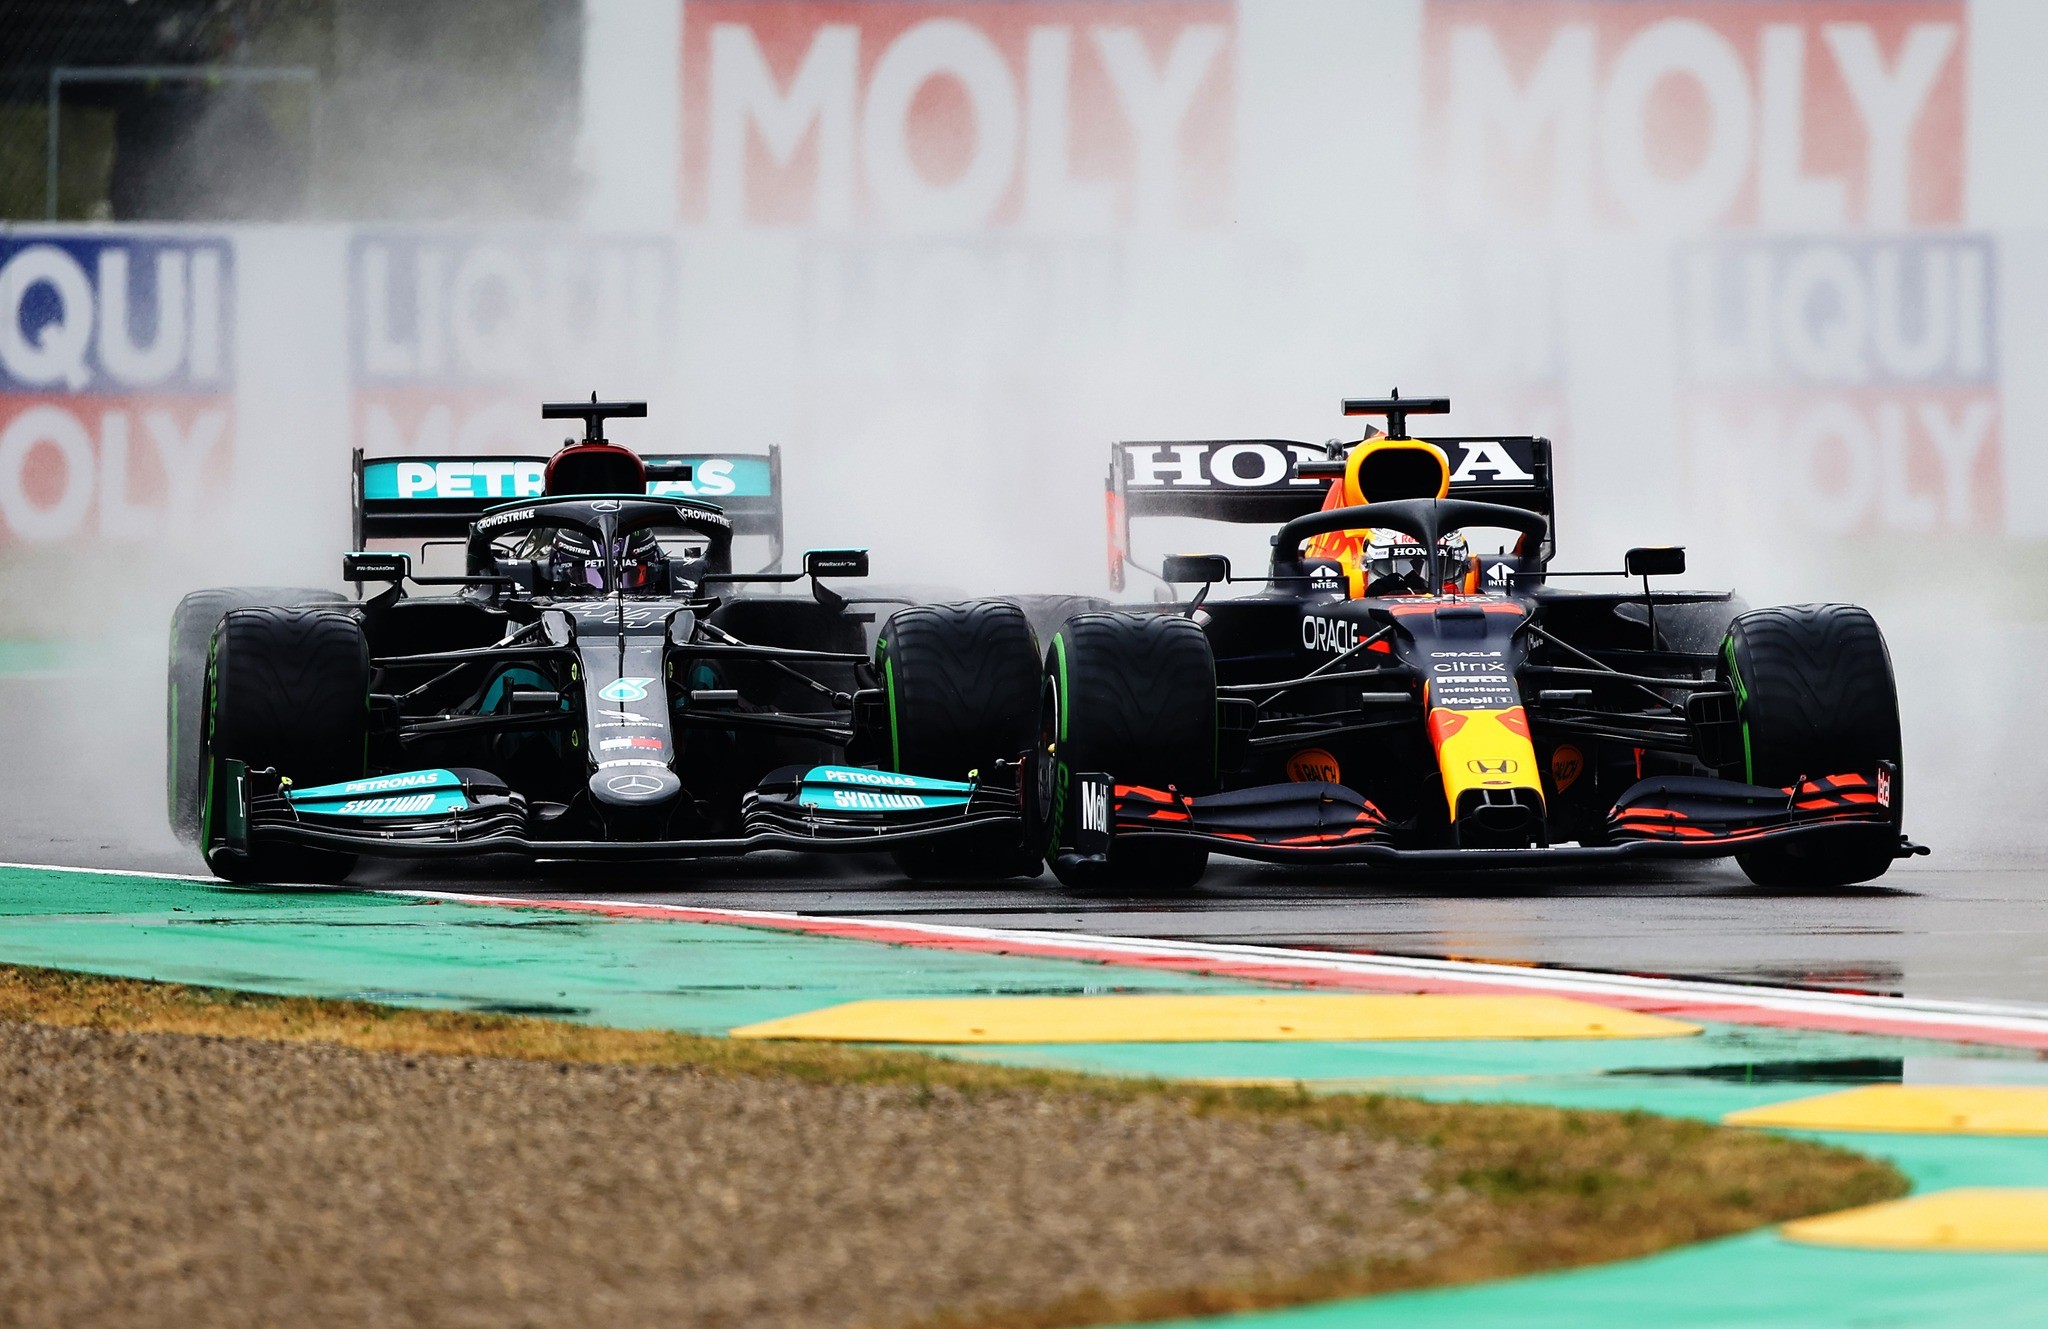 F1 Sporting Regulations Officially Changed, Shorter Races Now Mean Less Points